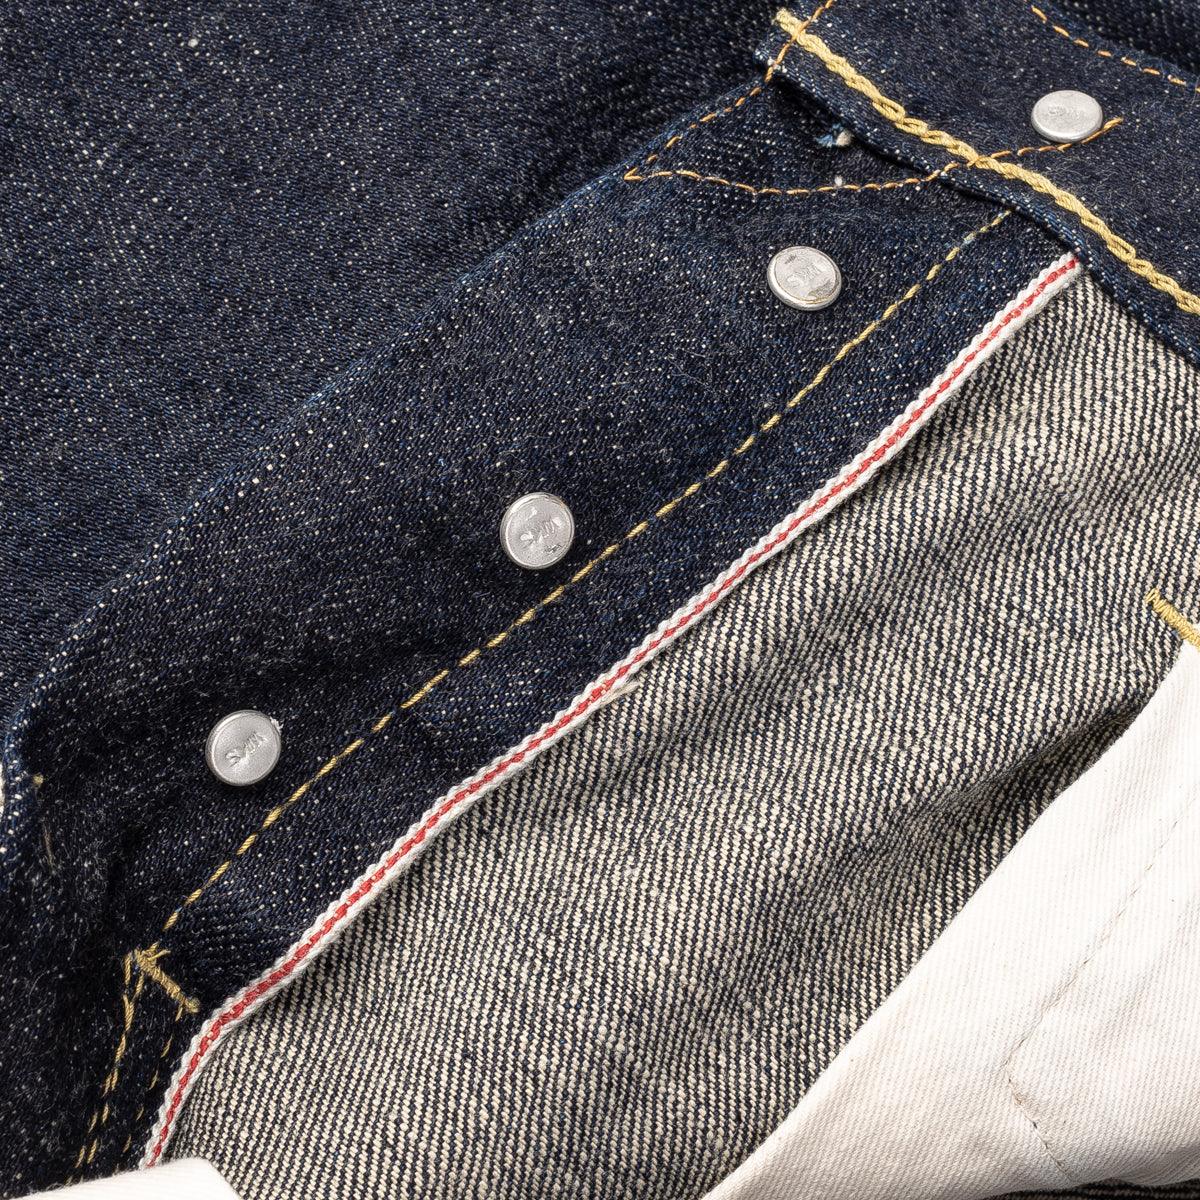 Image showing the IH-555S-18 - 18oz Vintage Selvedge Denim Slim Cut Jeans Indigo which is a Jeans described by the following info 555, Bottoms, Iron Heart, Released, Slim and sold on the IRON HEART GERMANY online store